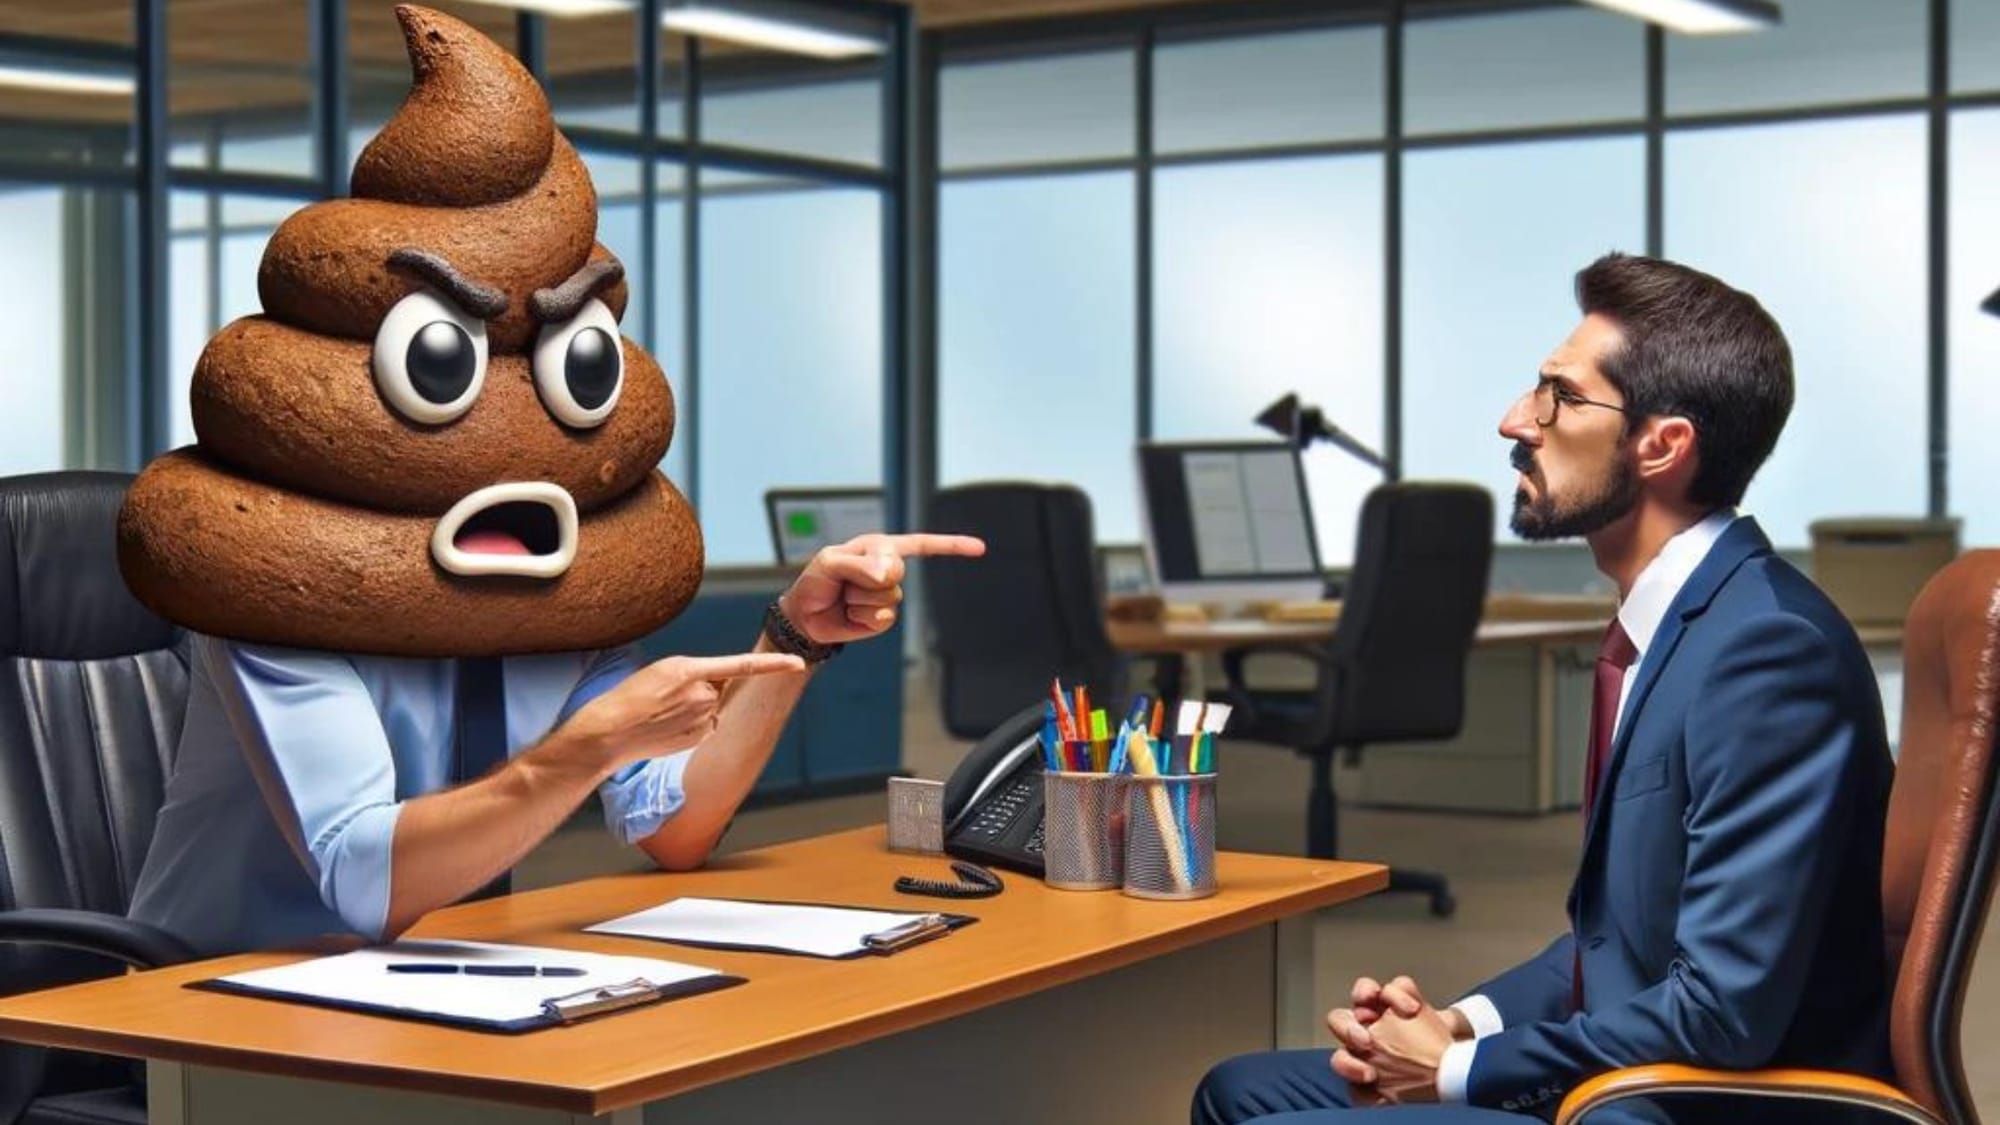 How To Deal With A Boss Who's A Toxic SH*T Head!: 5 Tips